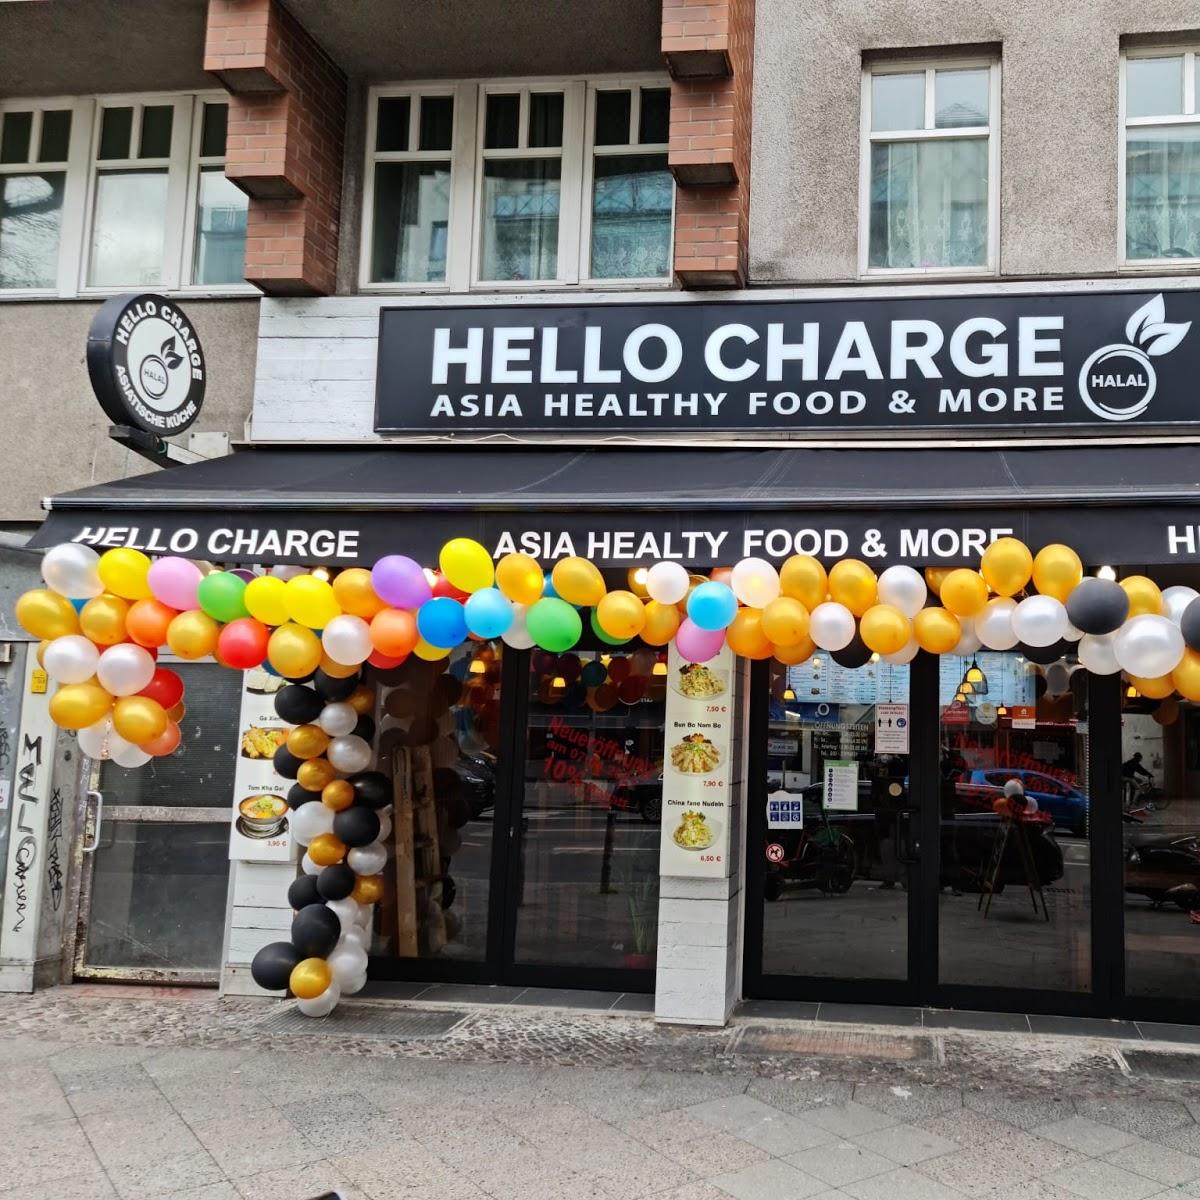 Restaurant "Hello Charge Asia Healthy Food & More(Halal)" in Berlin